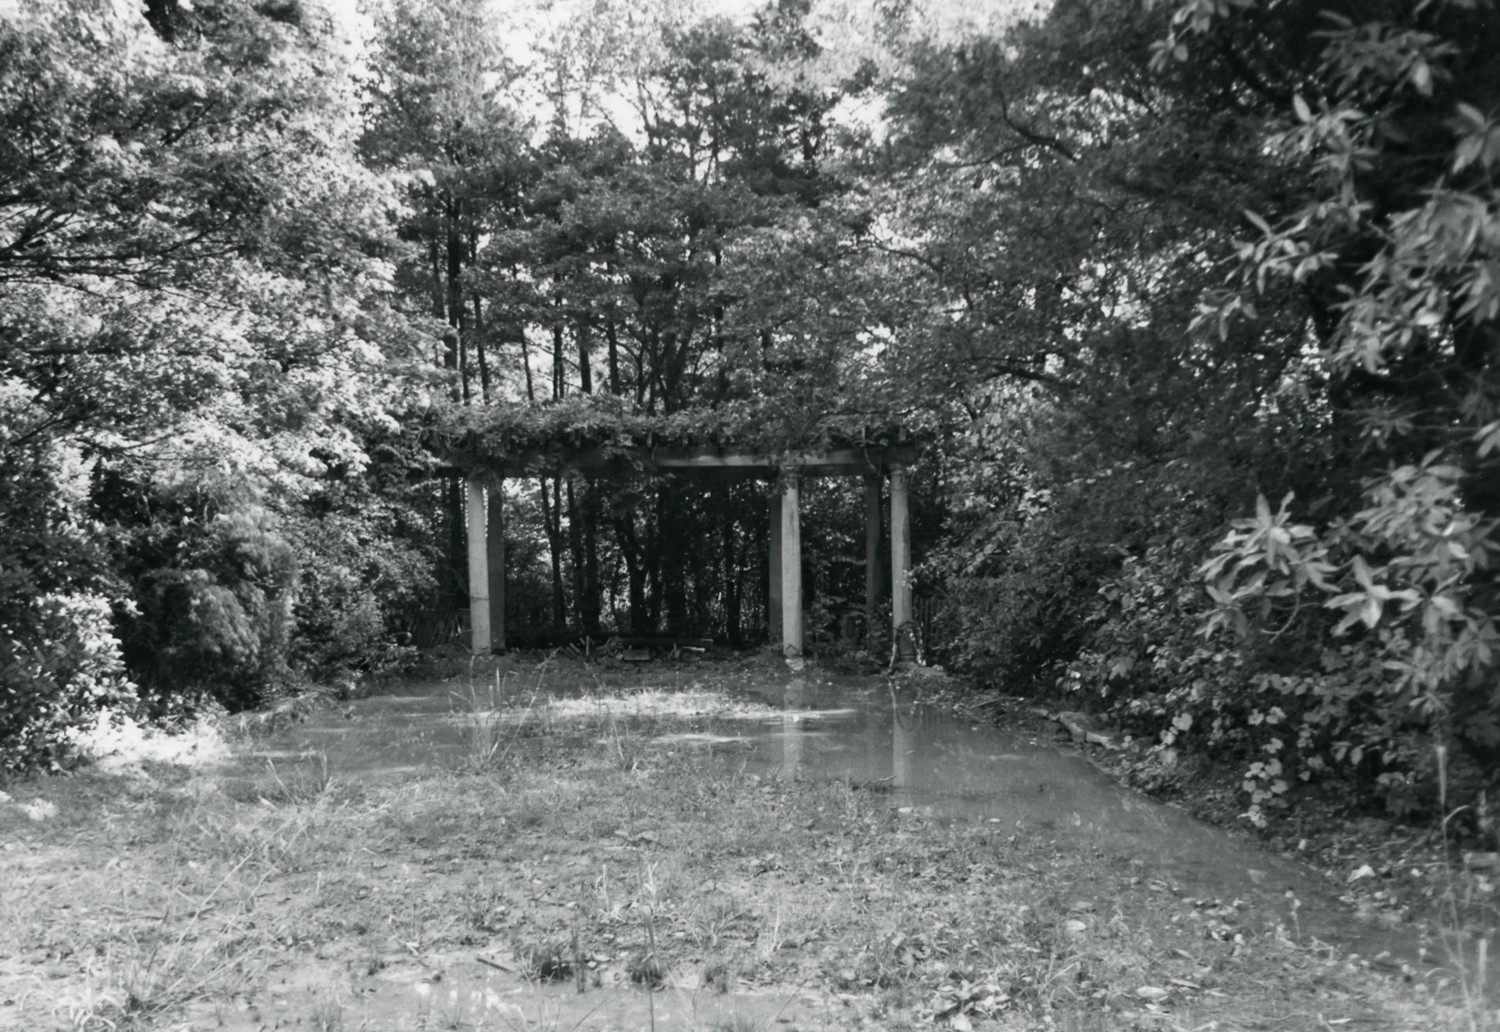 Edward and Louise Moore Estate, Mentor Ohio Pool and pergola looking east (1986)